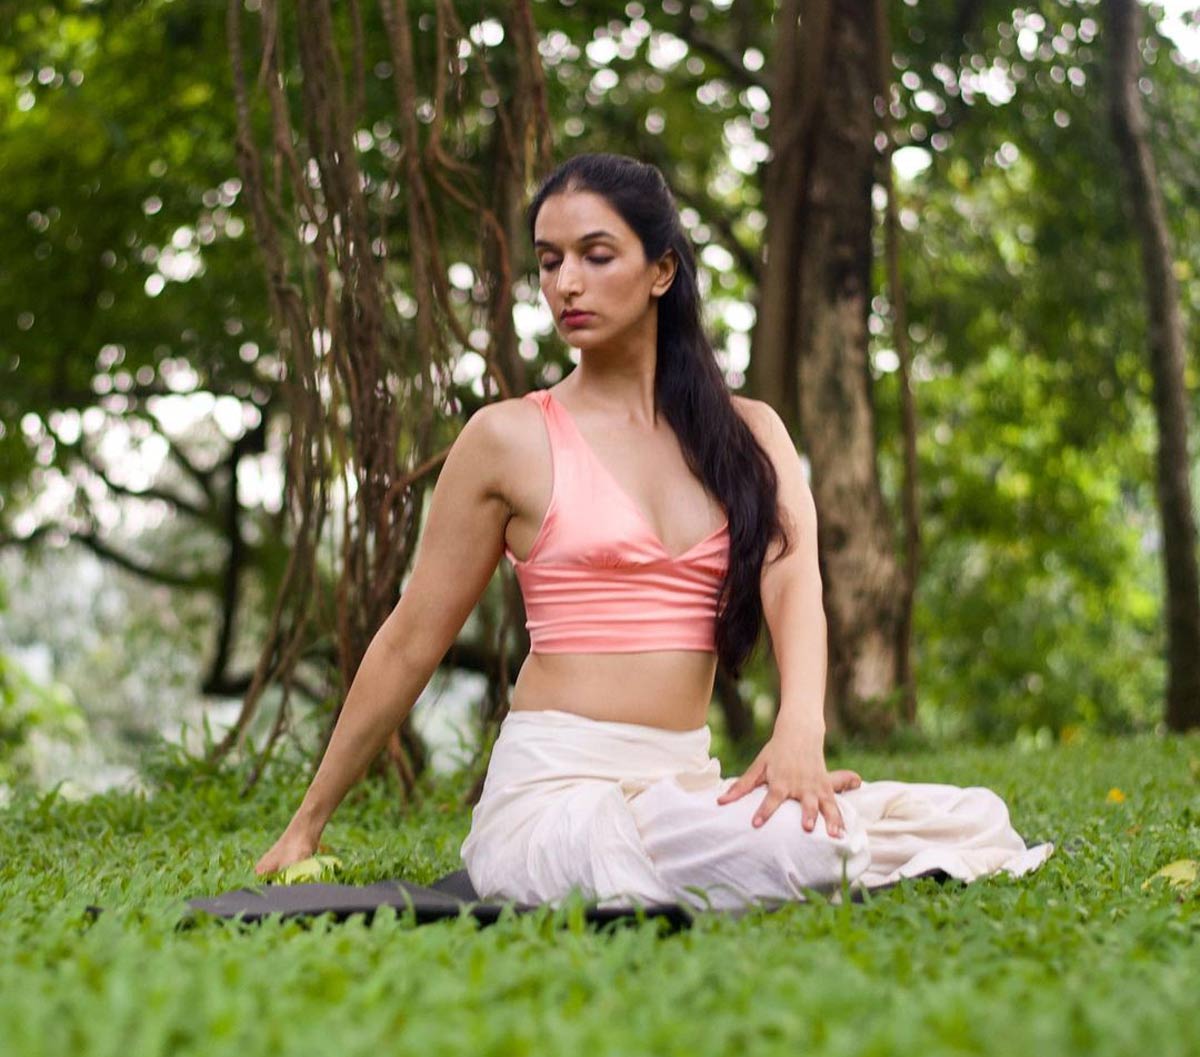 Asanas to prevent you from gaining weight